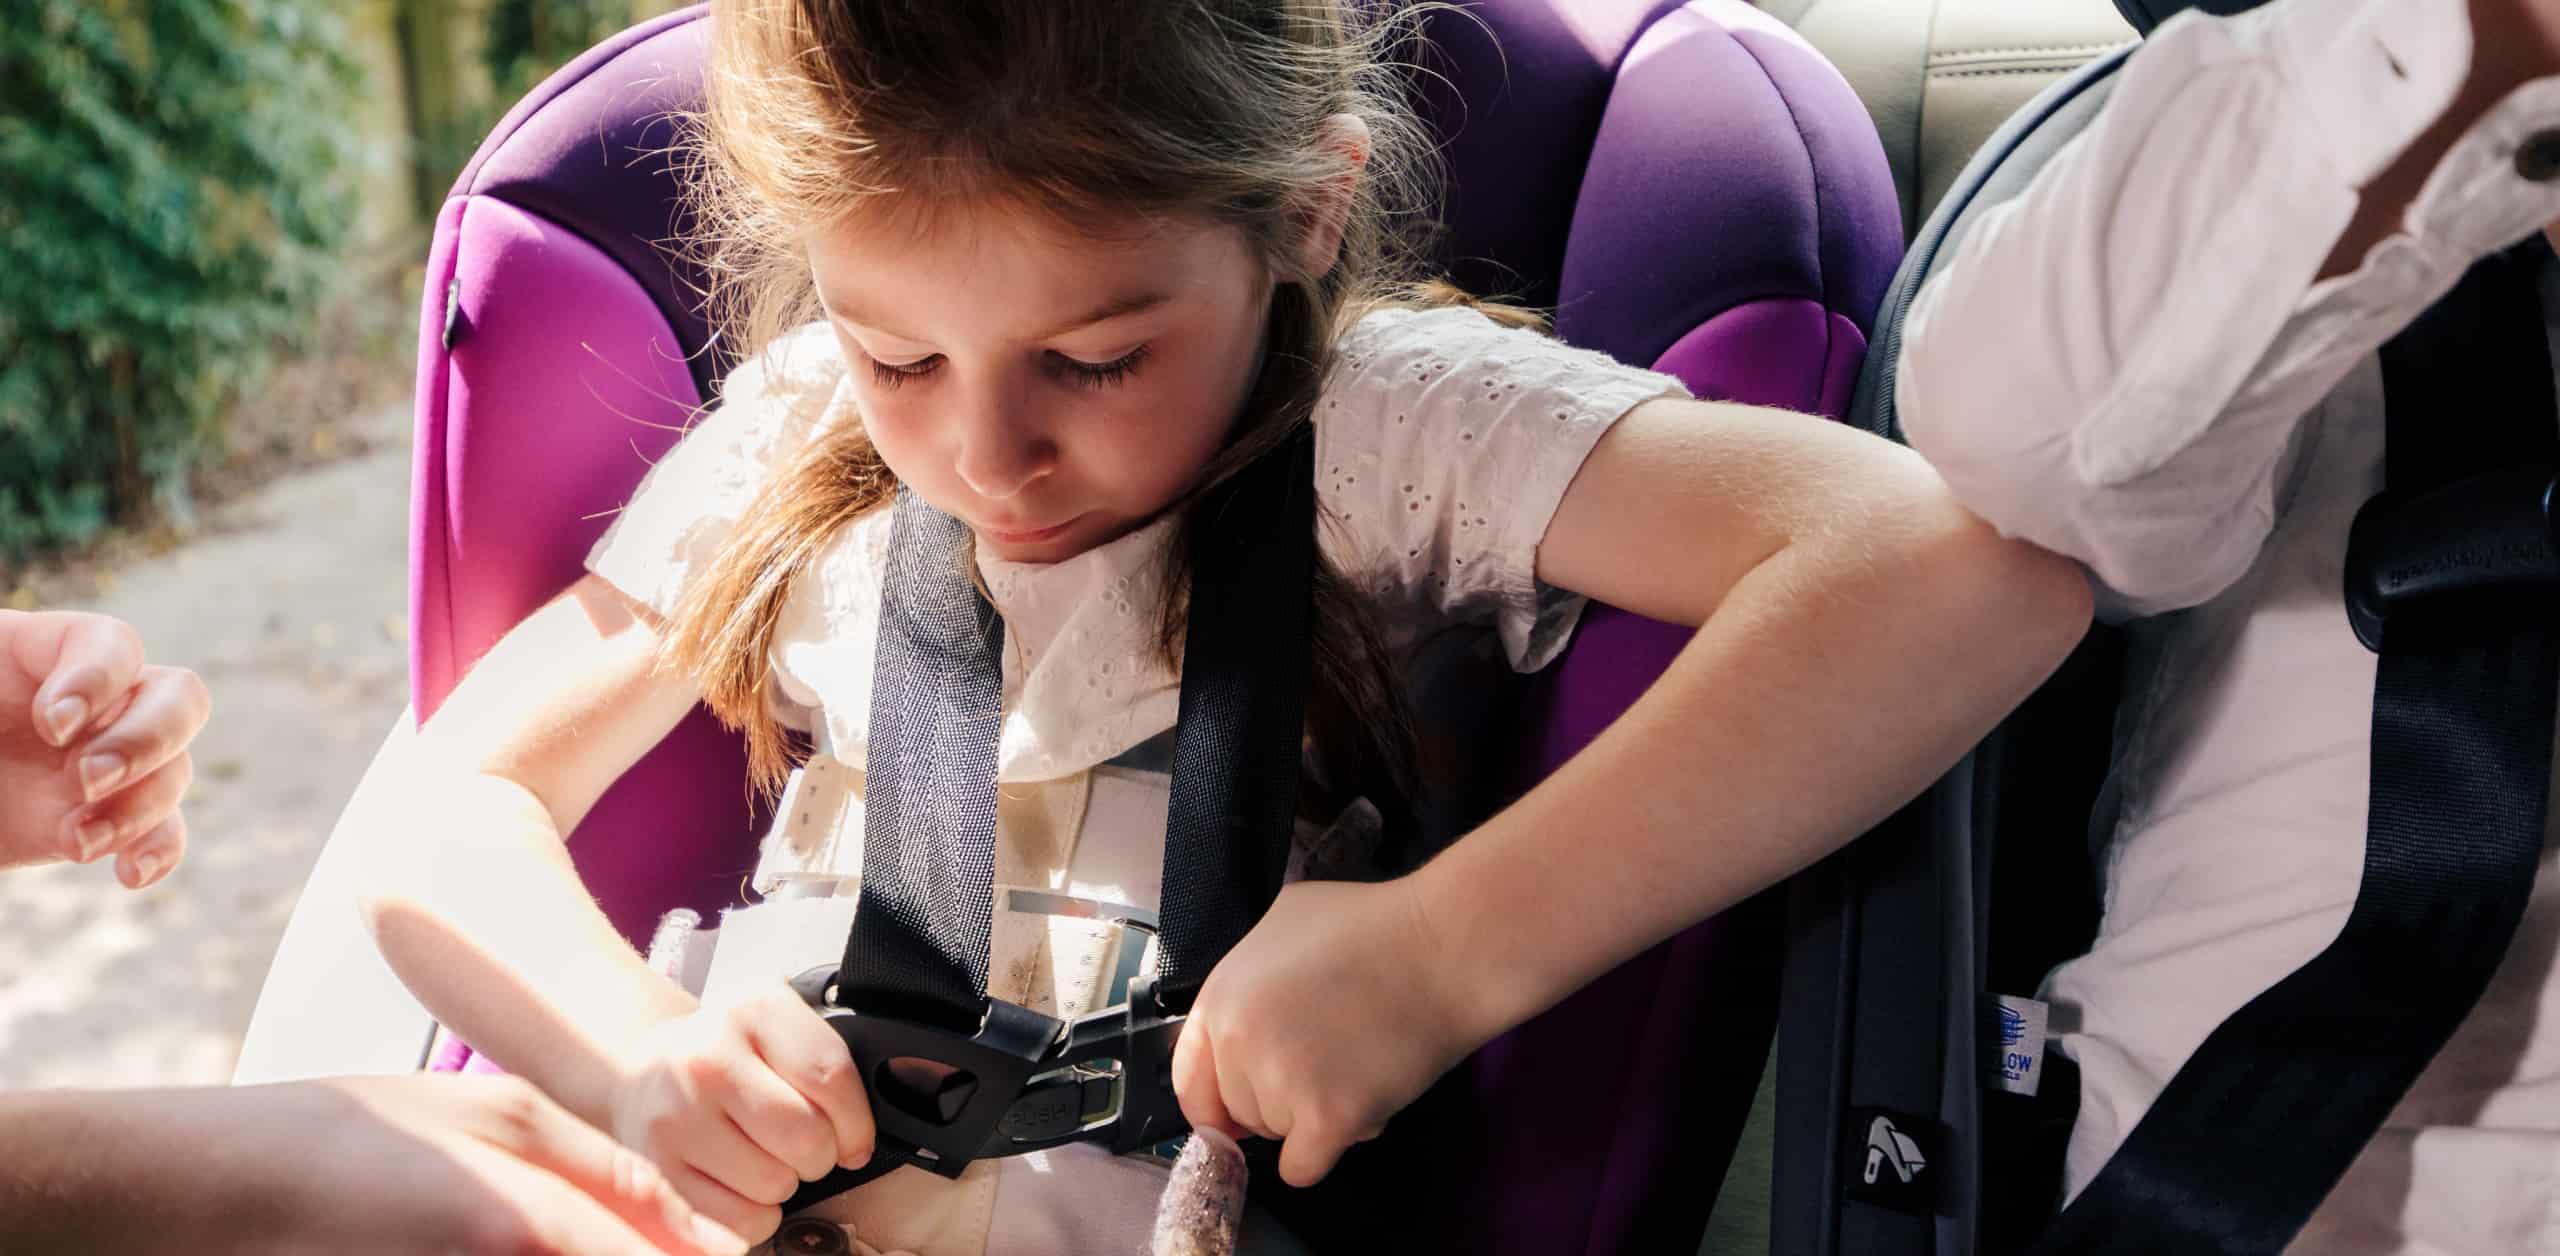 Car Seat Safety tips